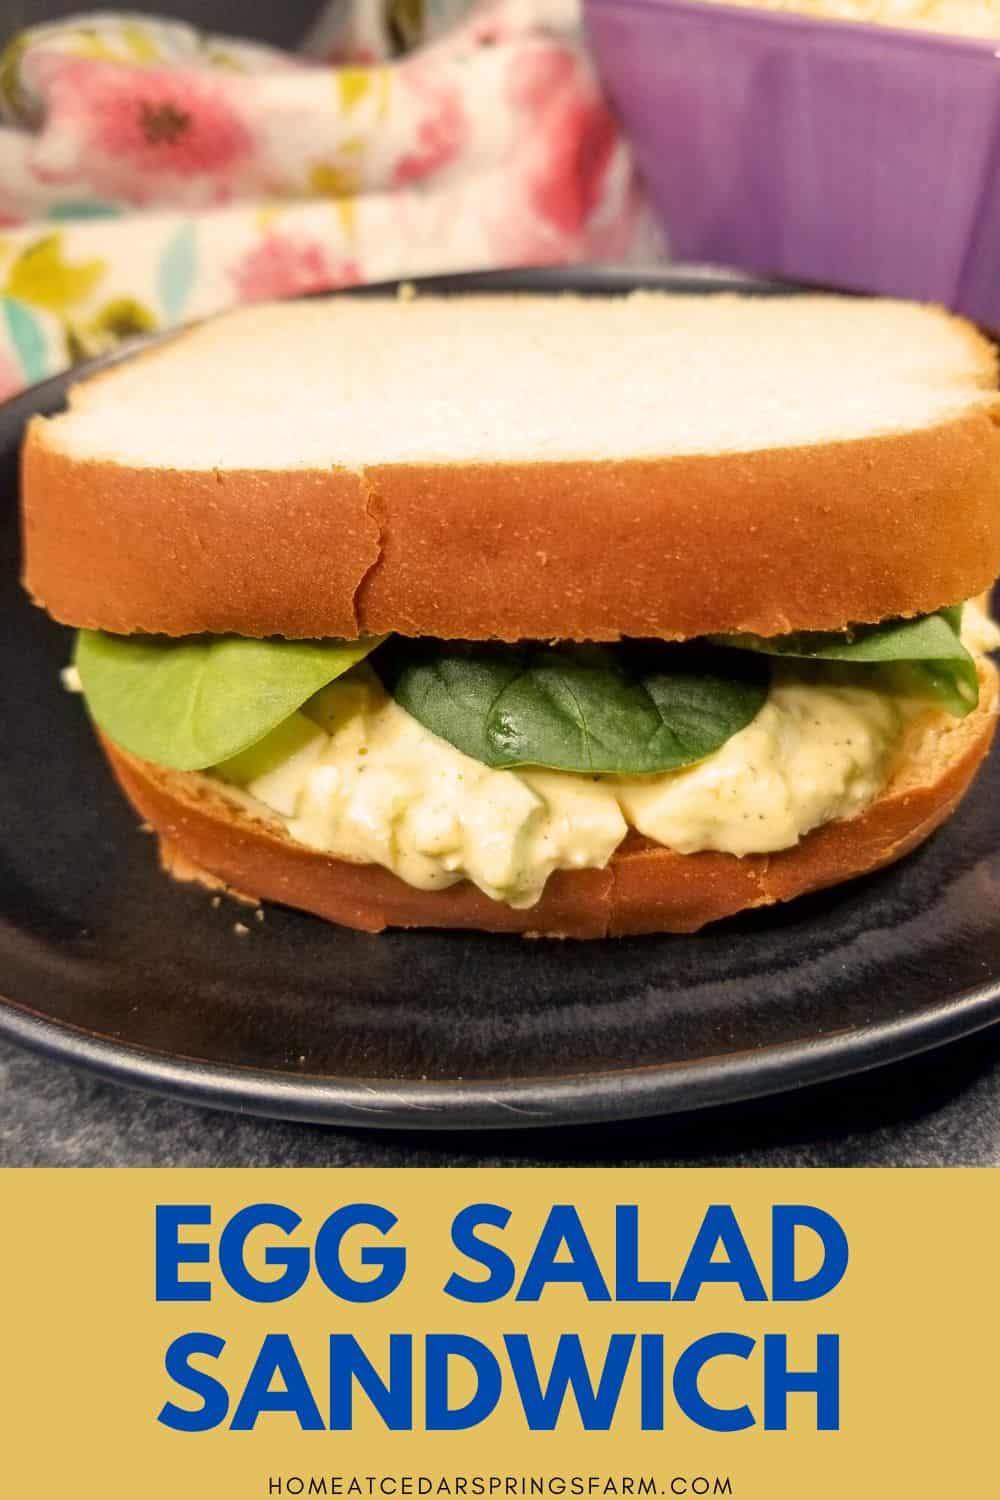 Egg salad sandwich on a black plate with text overlay.